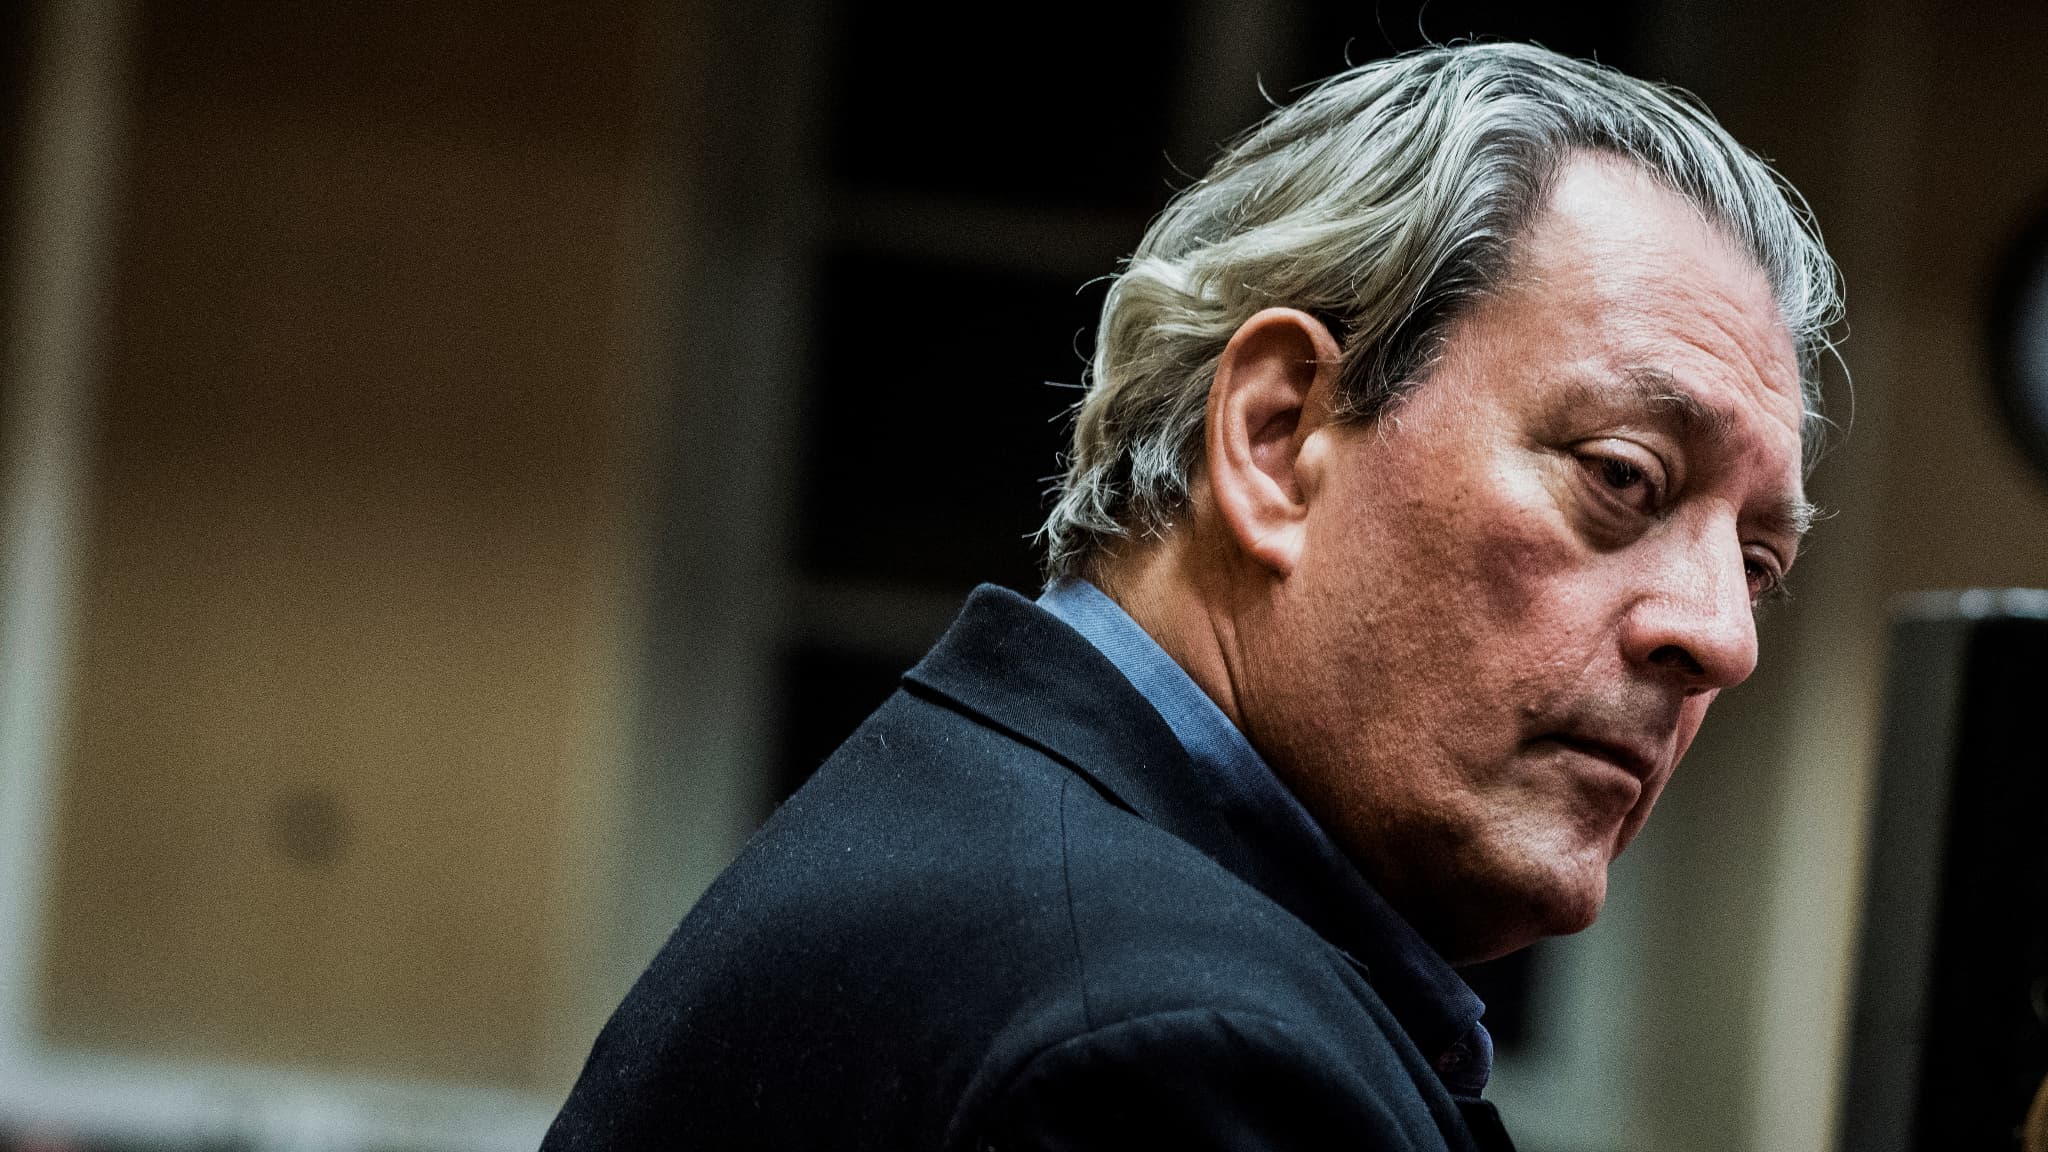 New York writer Paul Auster, suffering from cancer, will publish a new novel